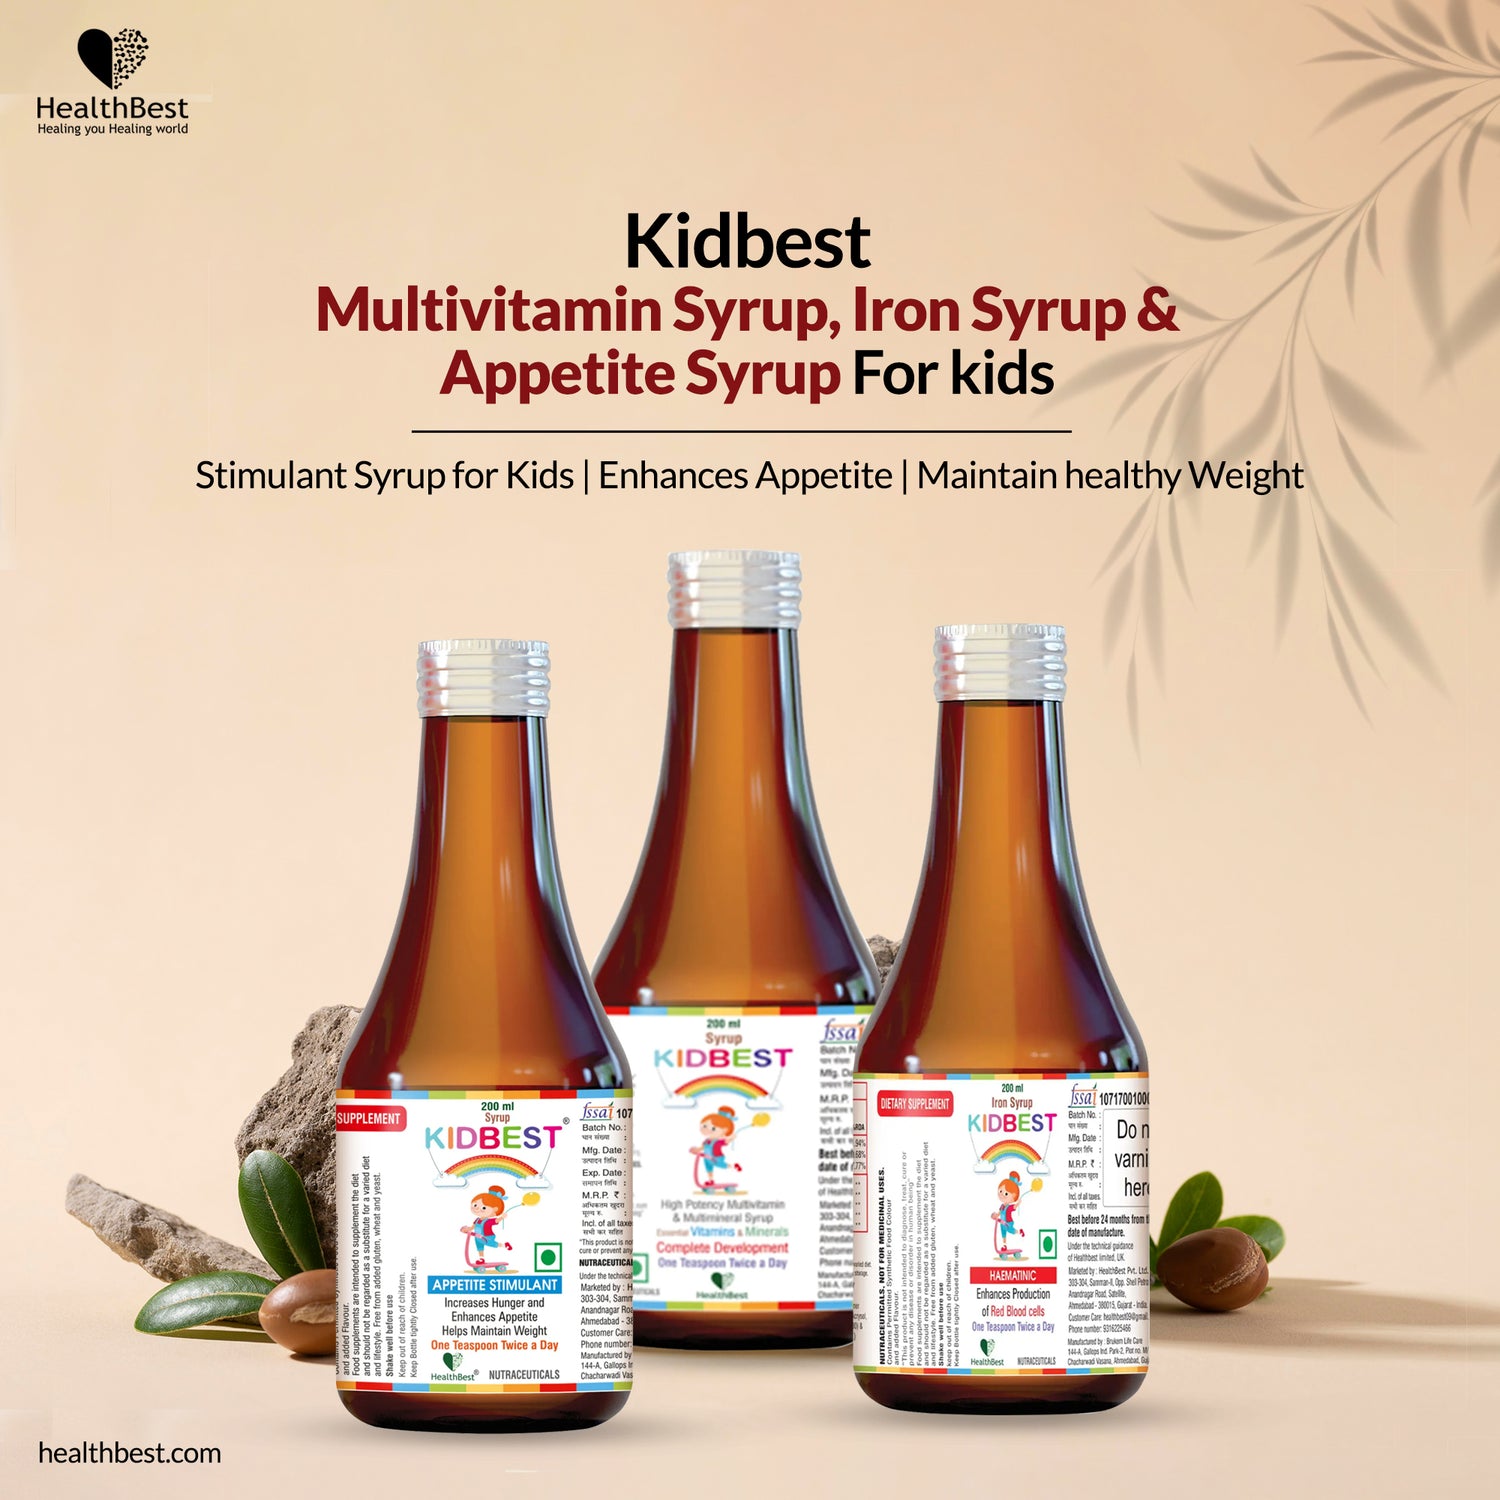 Kidbest Multivitamin Syrup and Iron Syrup and Appetite Syrup for Kids